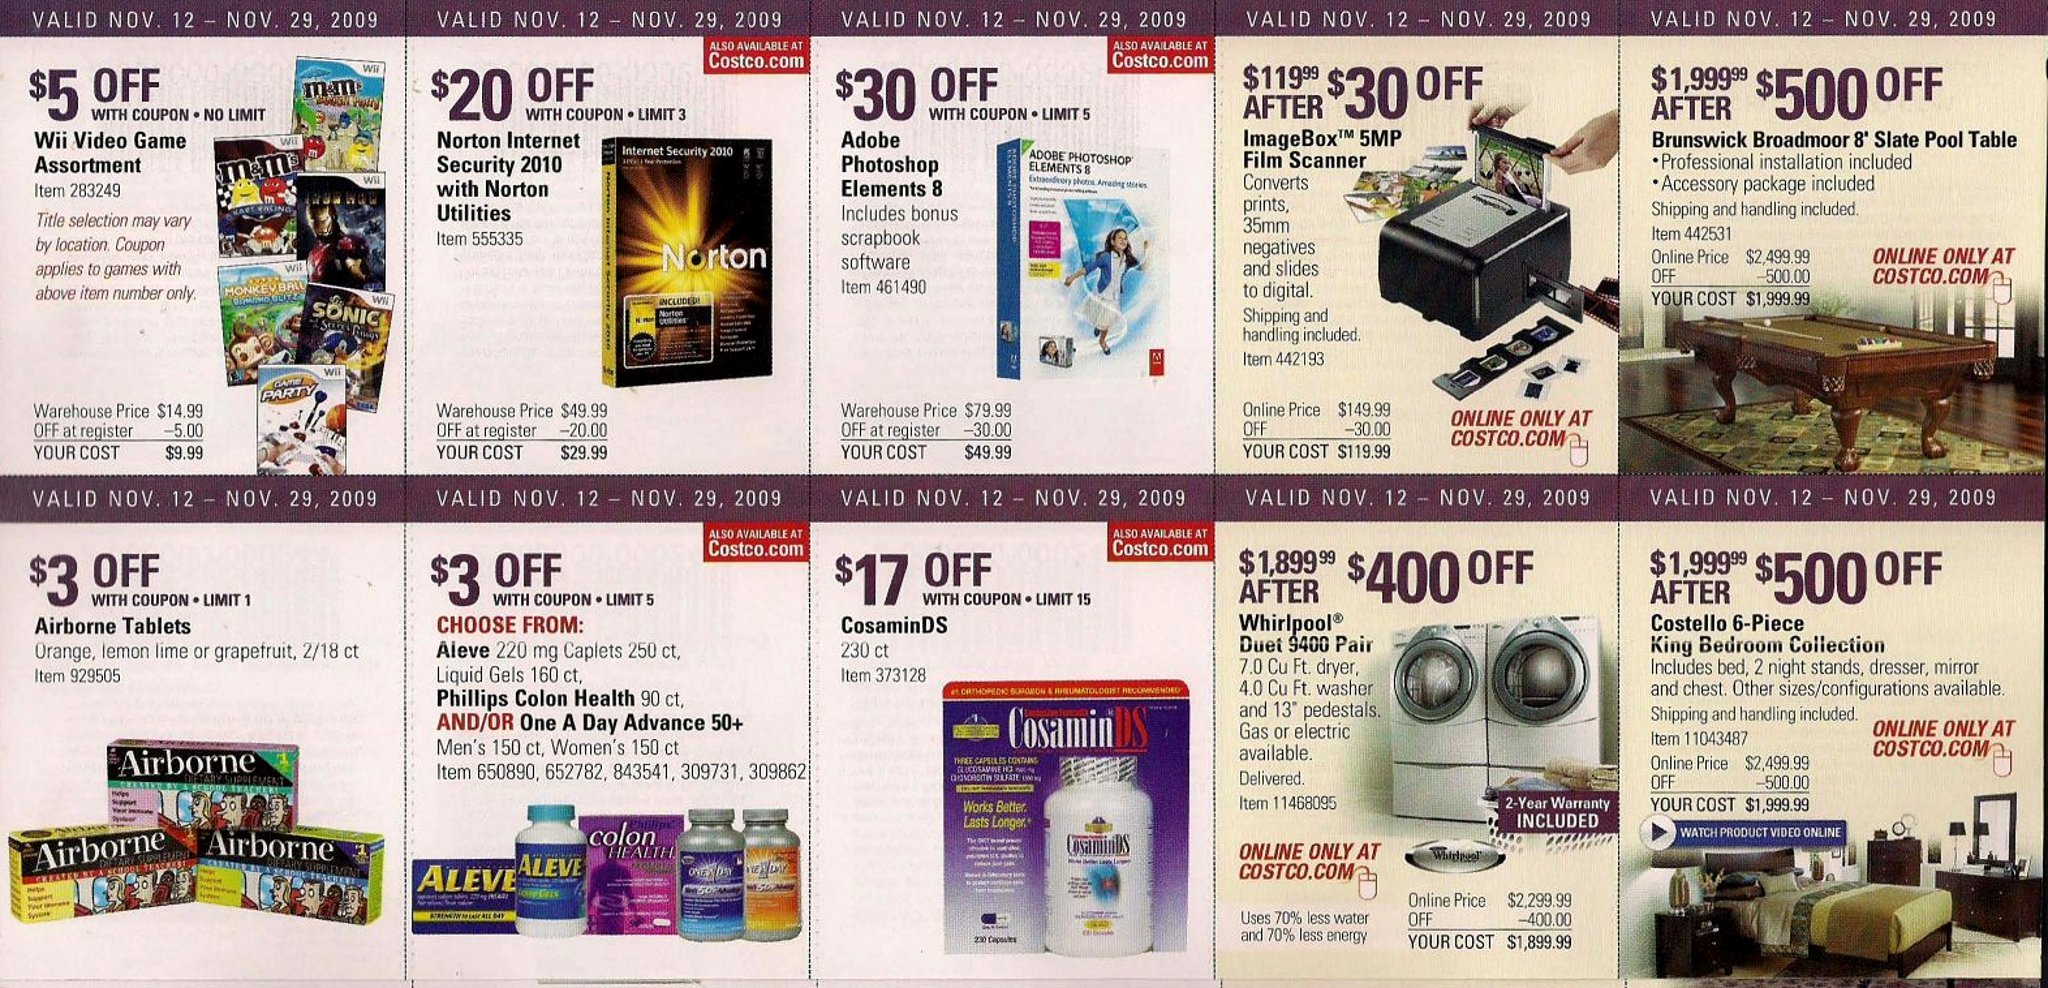 Coupon book page 7 in full-size.